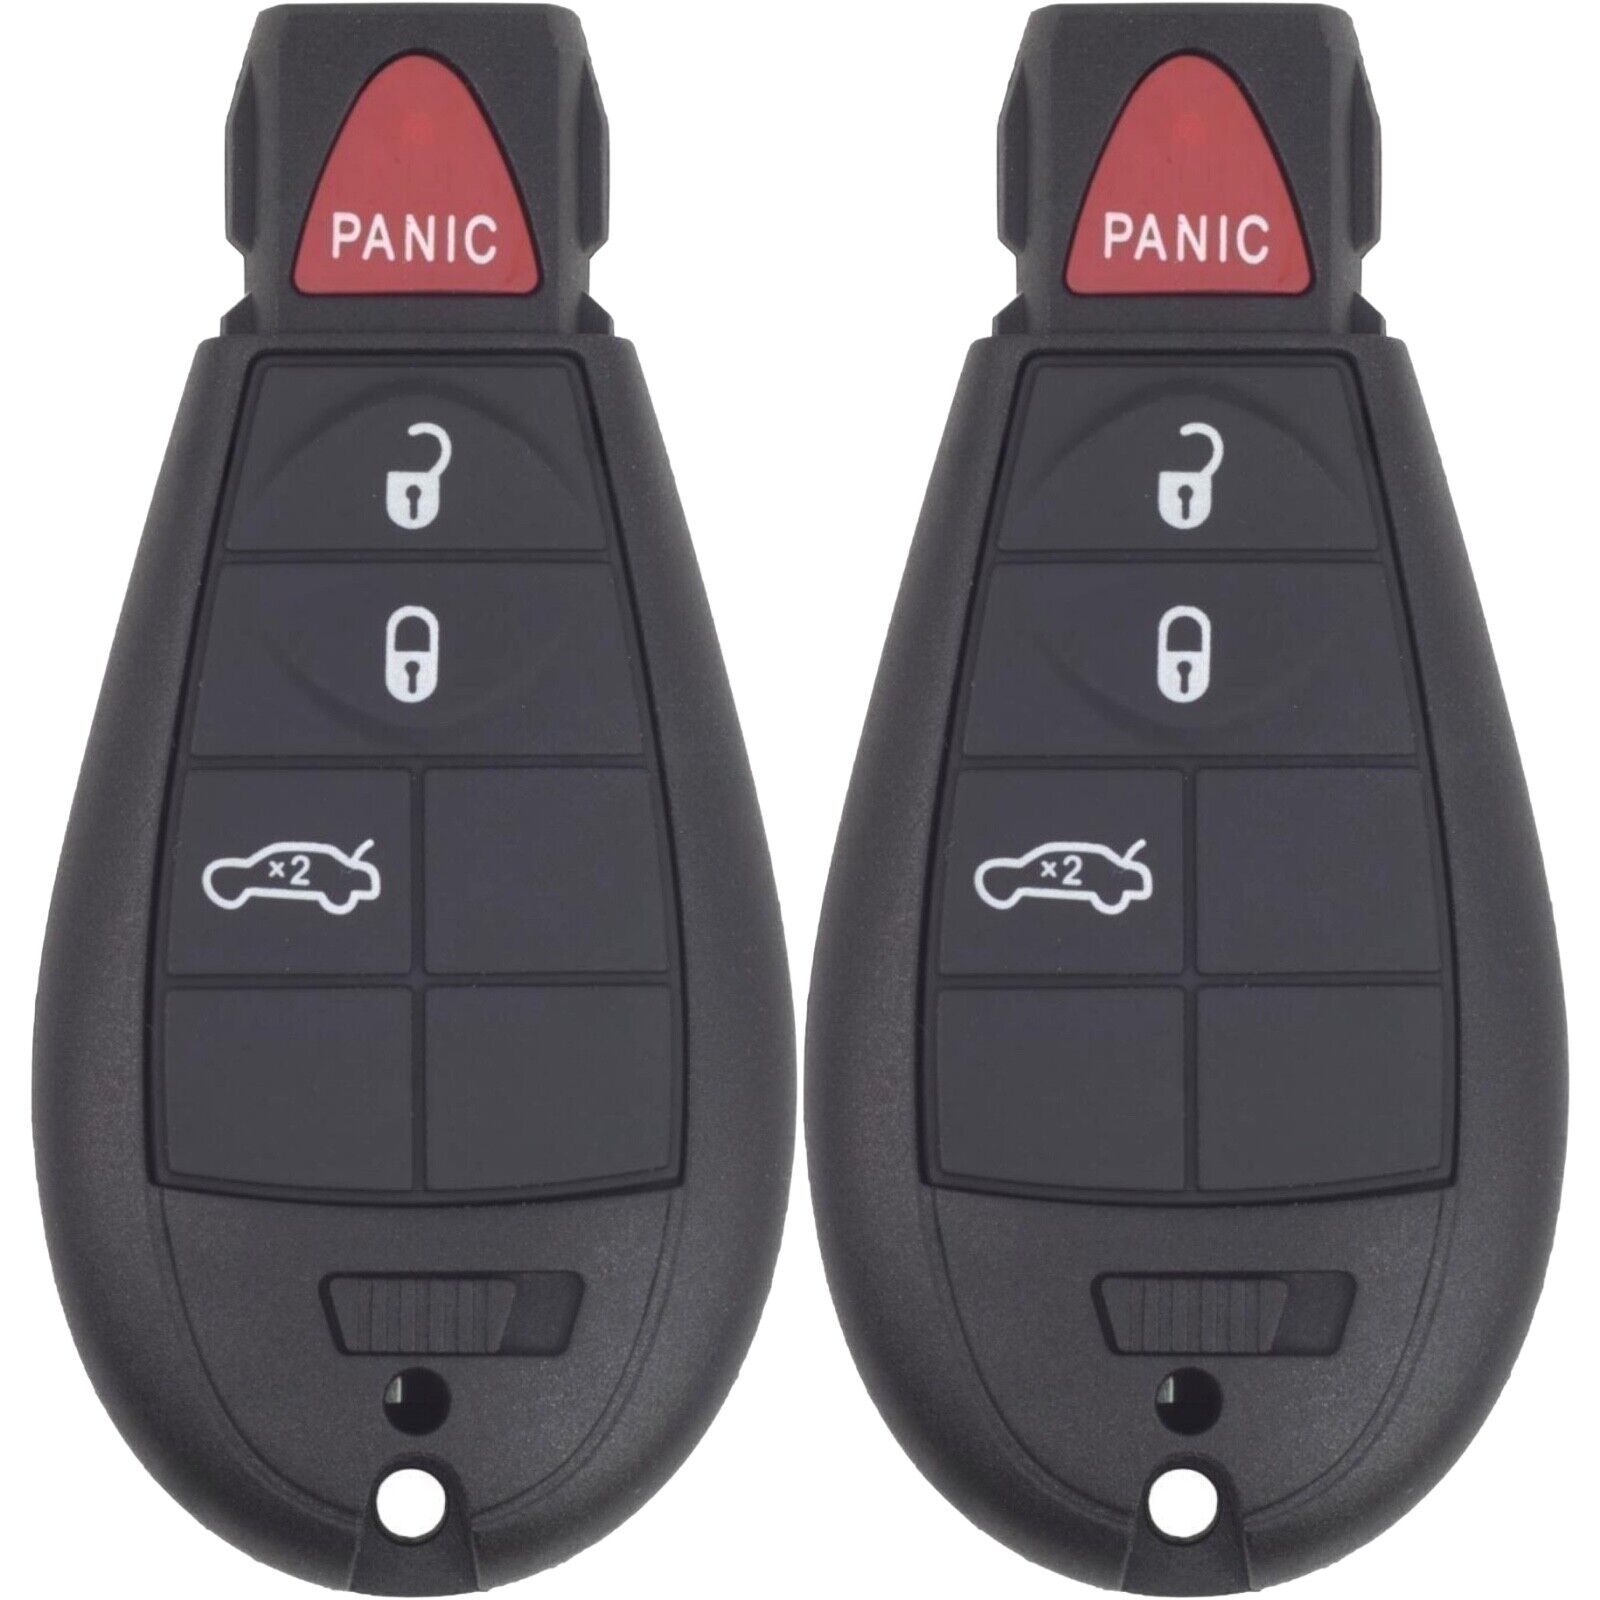 2x New Remote Key Fob Replacement For Chrysler Dodge Jeep IYZ-C01C M3N5WY783X